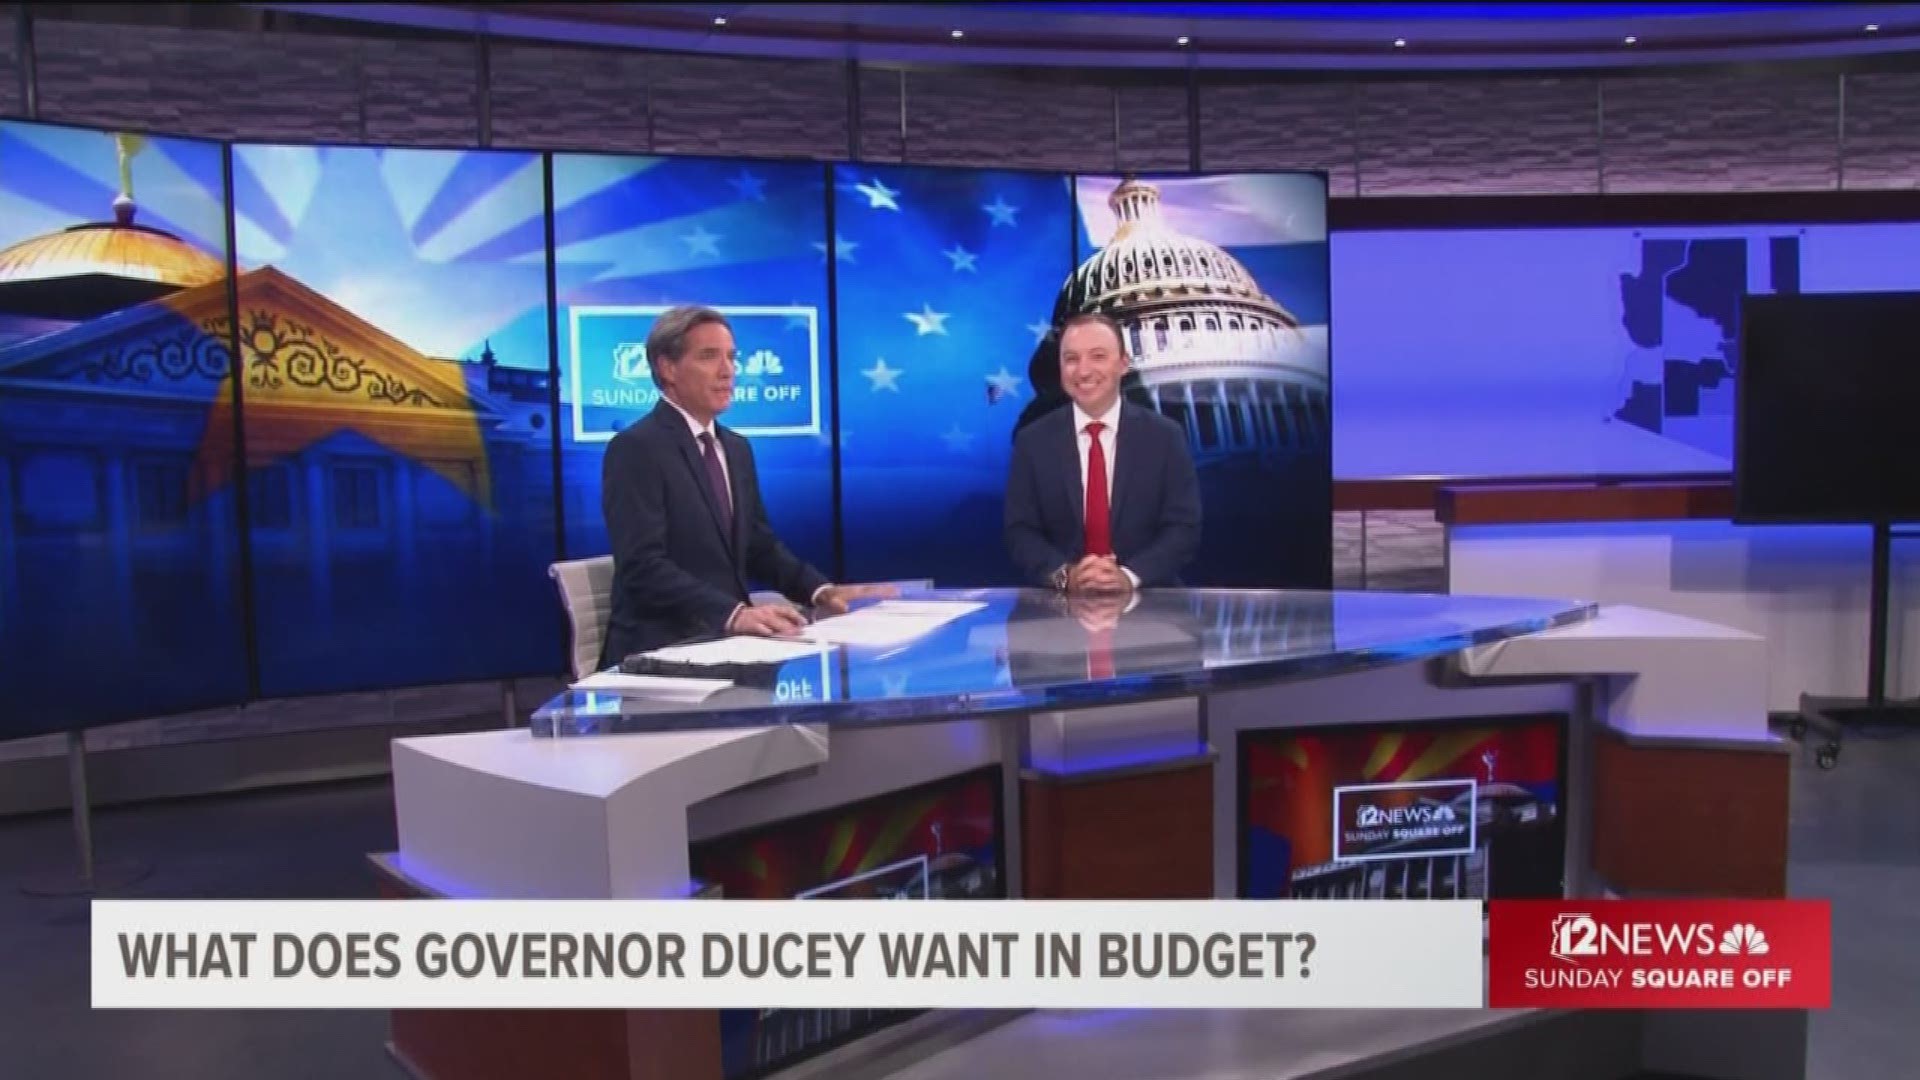 Gov. Doug Ducey’s top adviser explains his budget priorities, amid a standoff with fellow Republicans over stockpiling cash in a ‘rainy day fund.’